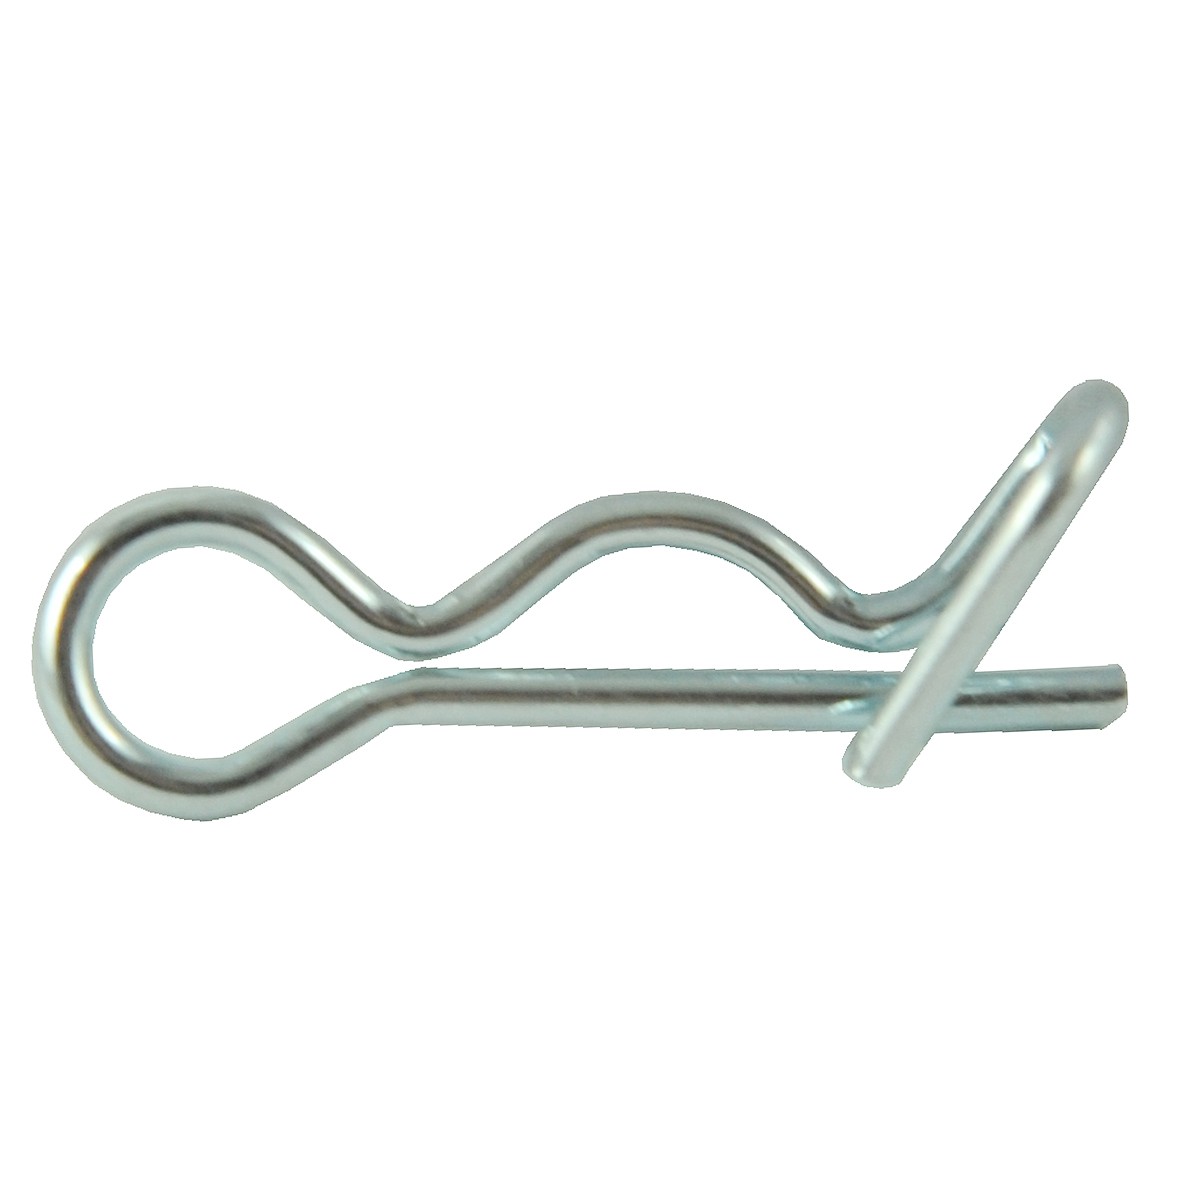 Cotter pin Ø 10 mm / 33 x 1.50 mm LS XJ25 / LS MT3.35 / LS MT3.40 / LS MT3.50 / LS MT3.60 / TRG670 / 40380549